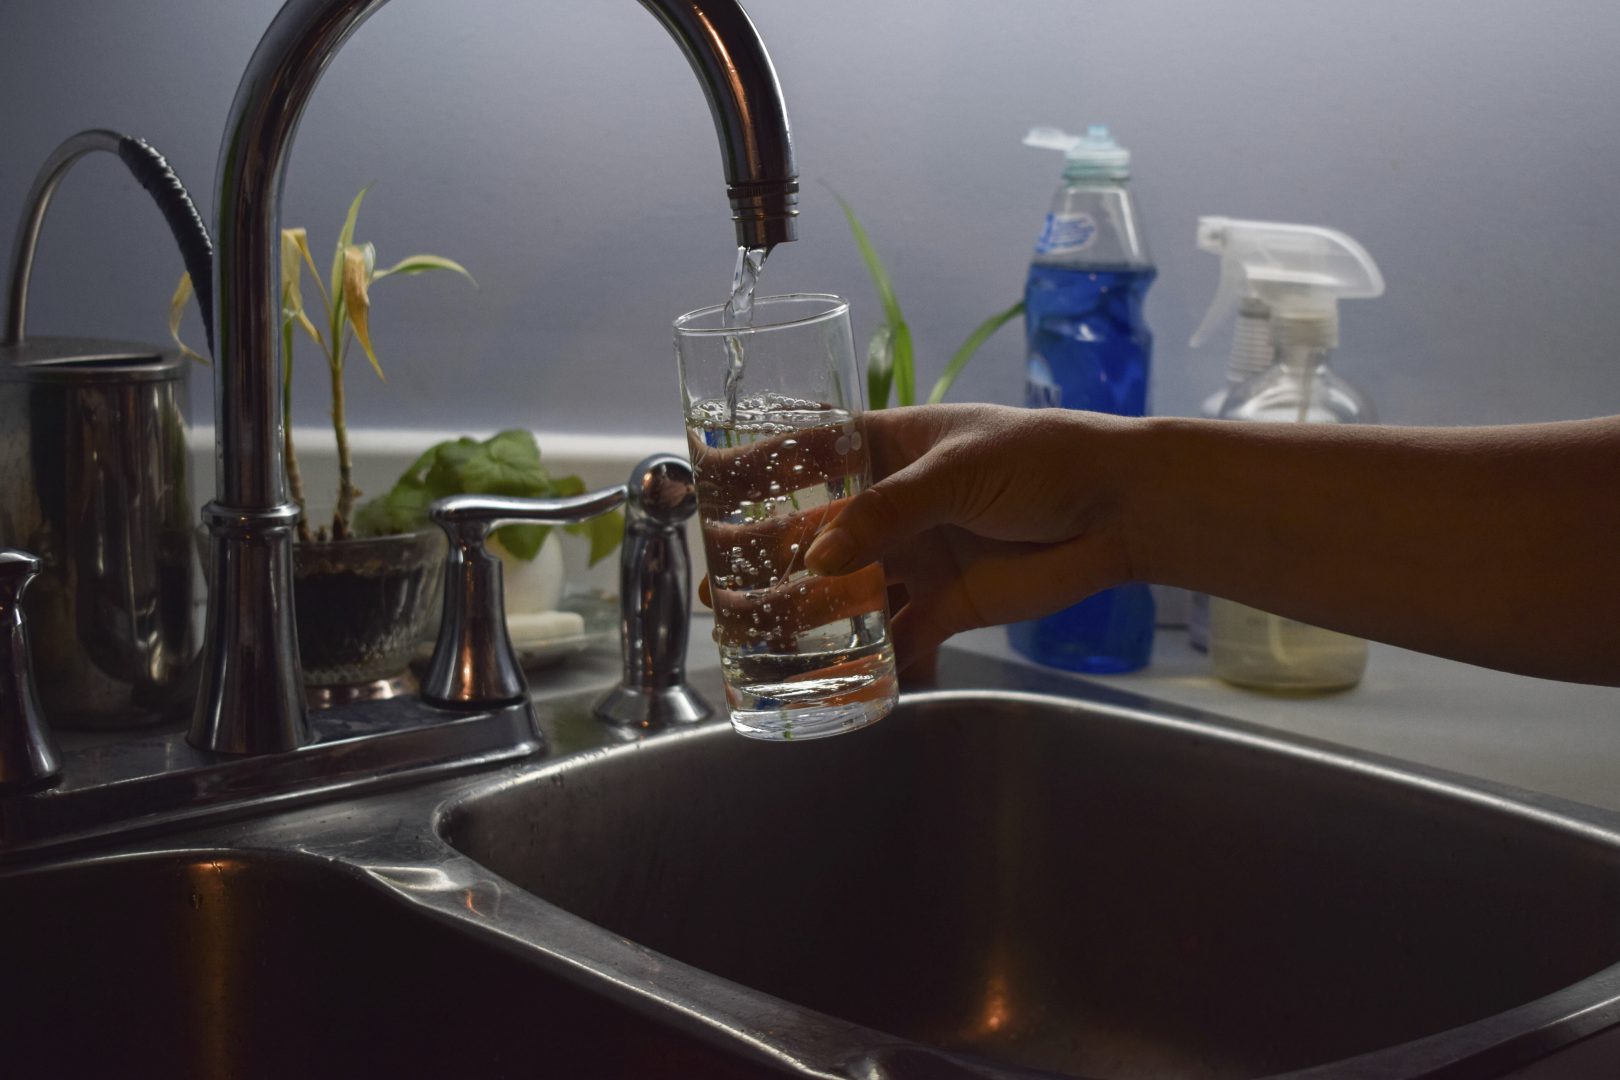 In this July 21, 2019 photo, Florabela Cunha fills a glass of water from her kitchen faucet in Prince Rupert, British Columbia, Canada. In previous summers she used to make iced tea for her family using water from her tap, but has since stopped citing concerns about the water quality. Hundreds of thousands of Canadians from coast to coast have been unwittingly exposed to levels of lead in their drinking water.